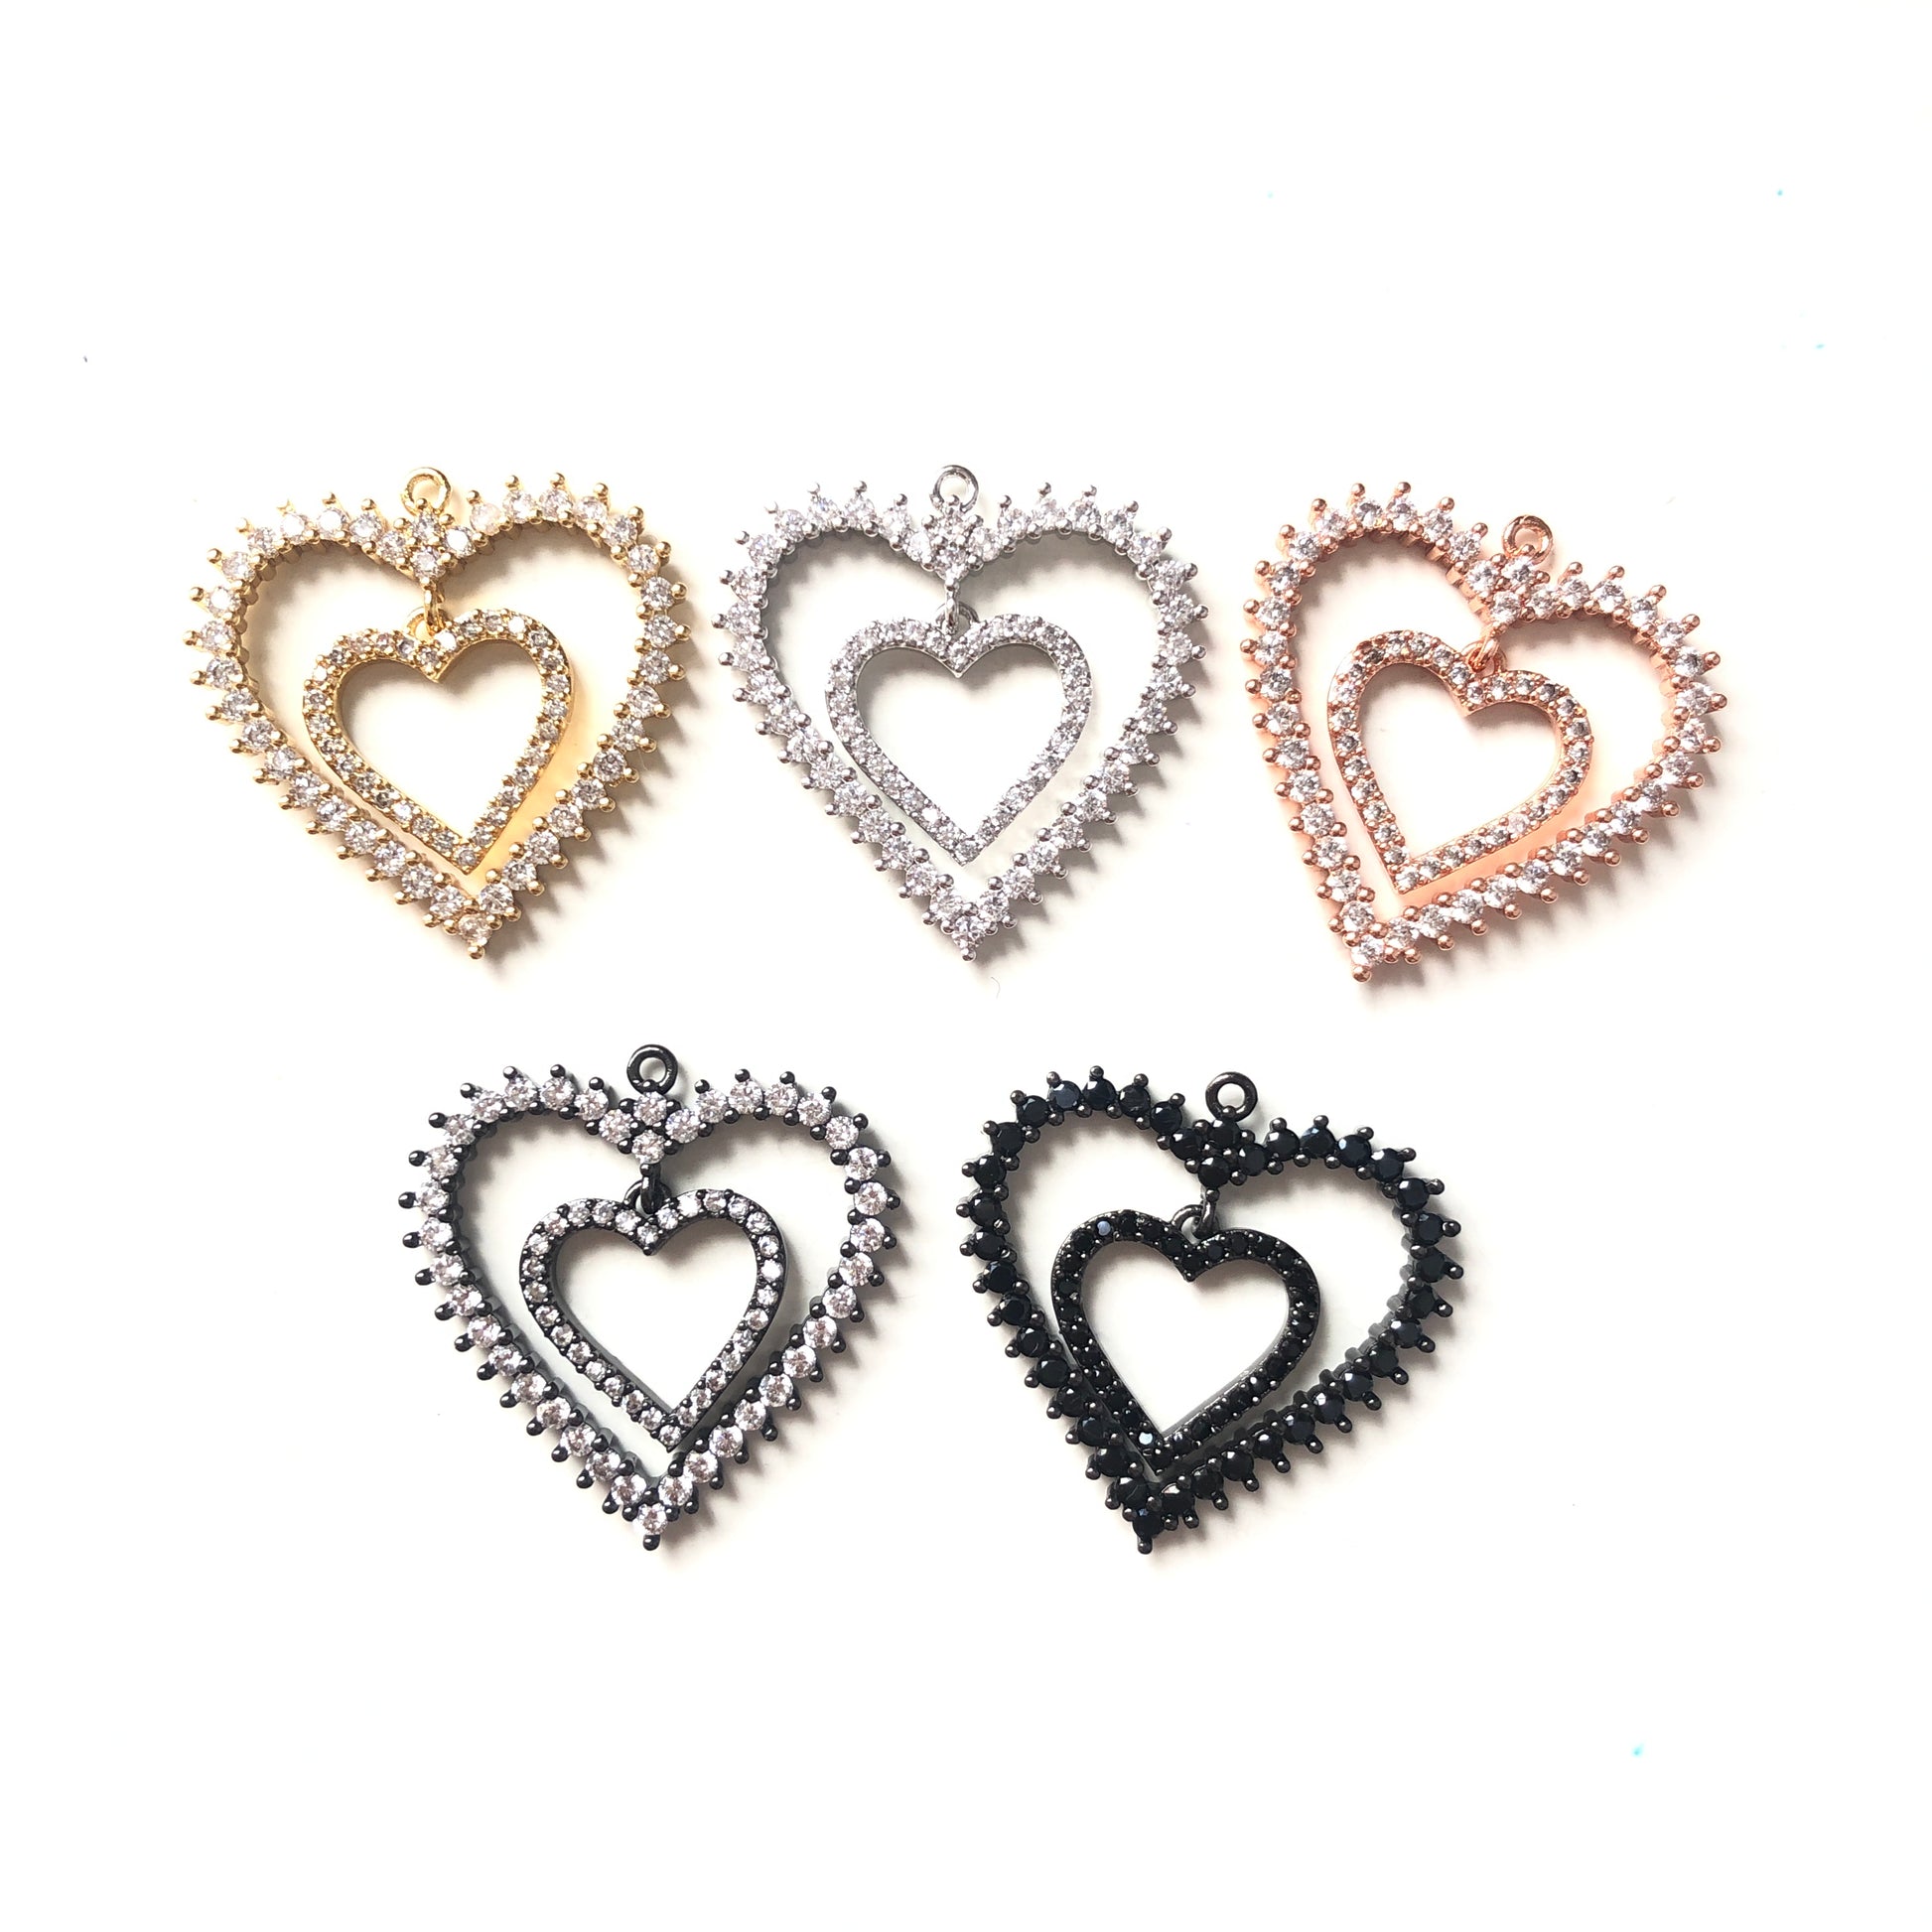 10pcs/lot 27*26.5mm CZ Paved Double Heart Charms CZ Paved Charms Hearts On Sale Charms Beads Beyond